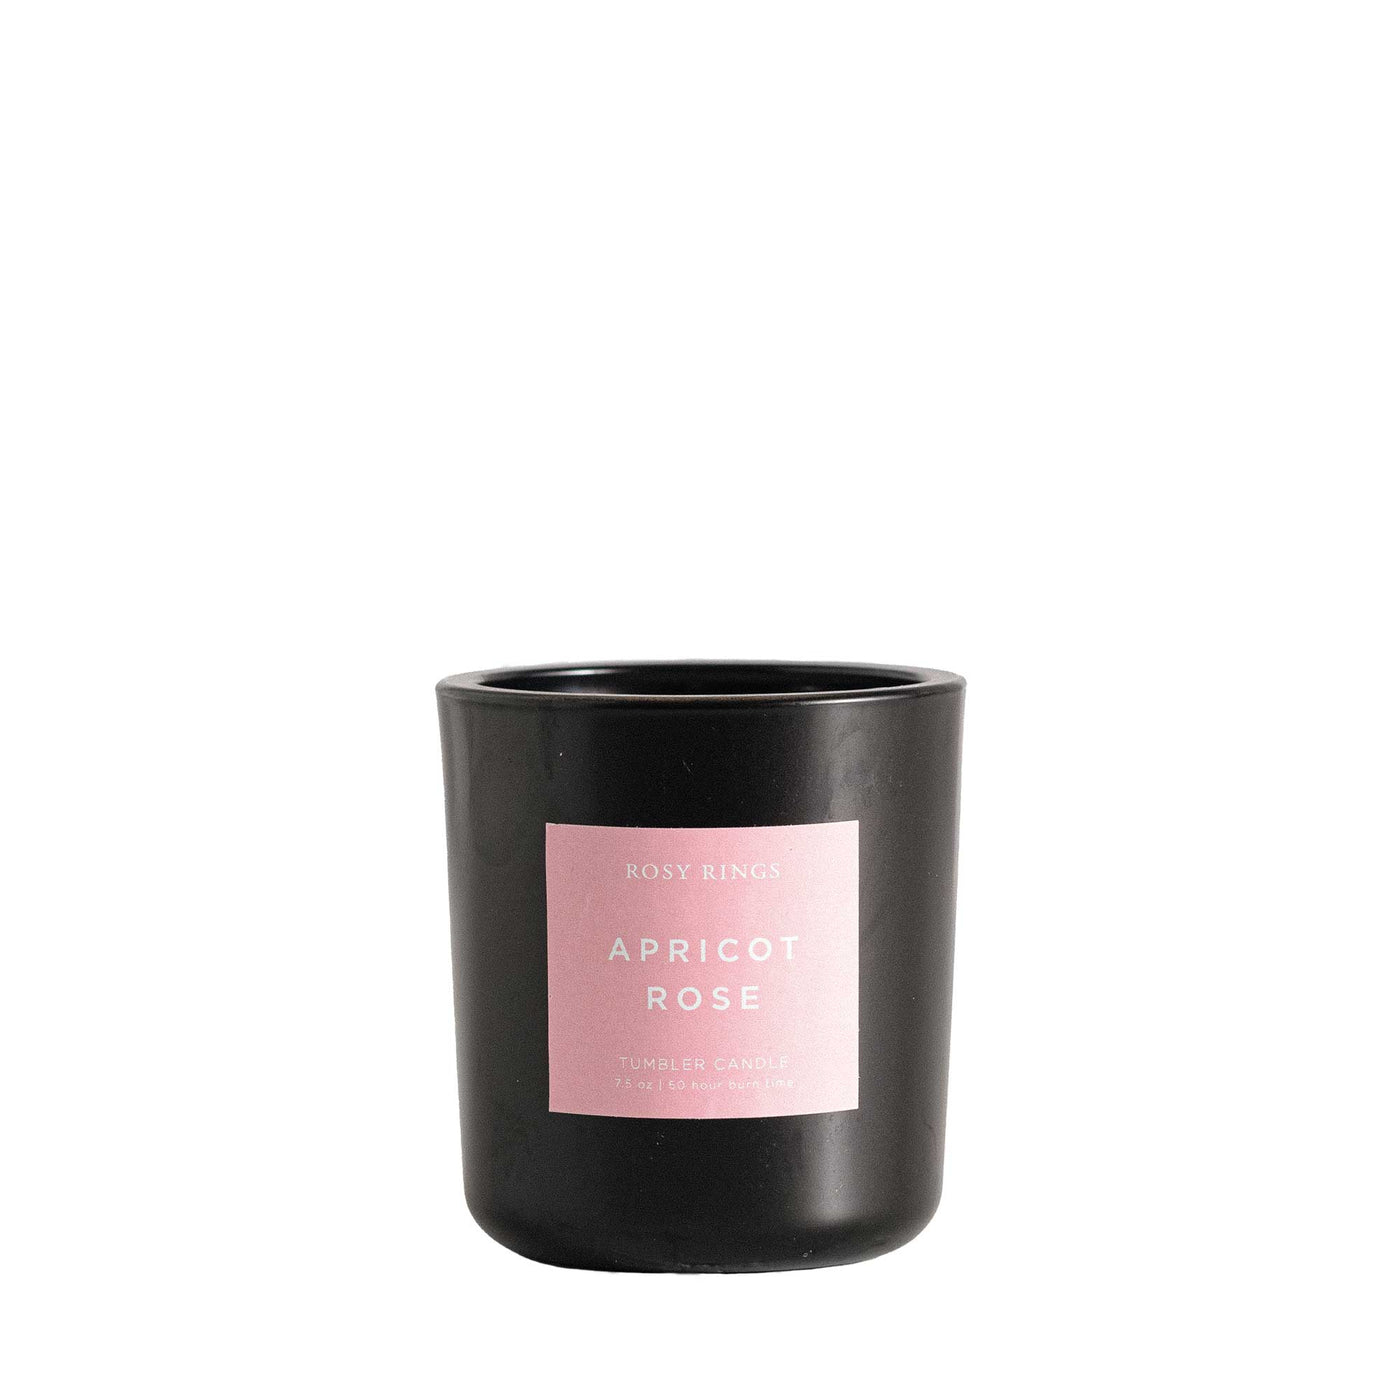 Apricot Rose Boxed Glass Tumbler Candle